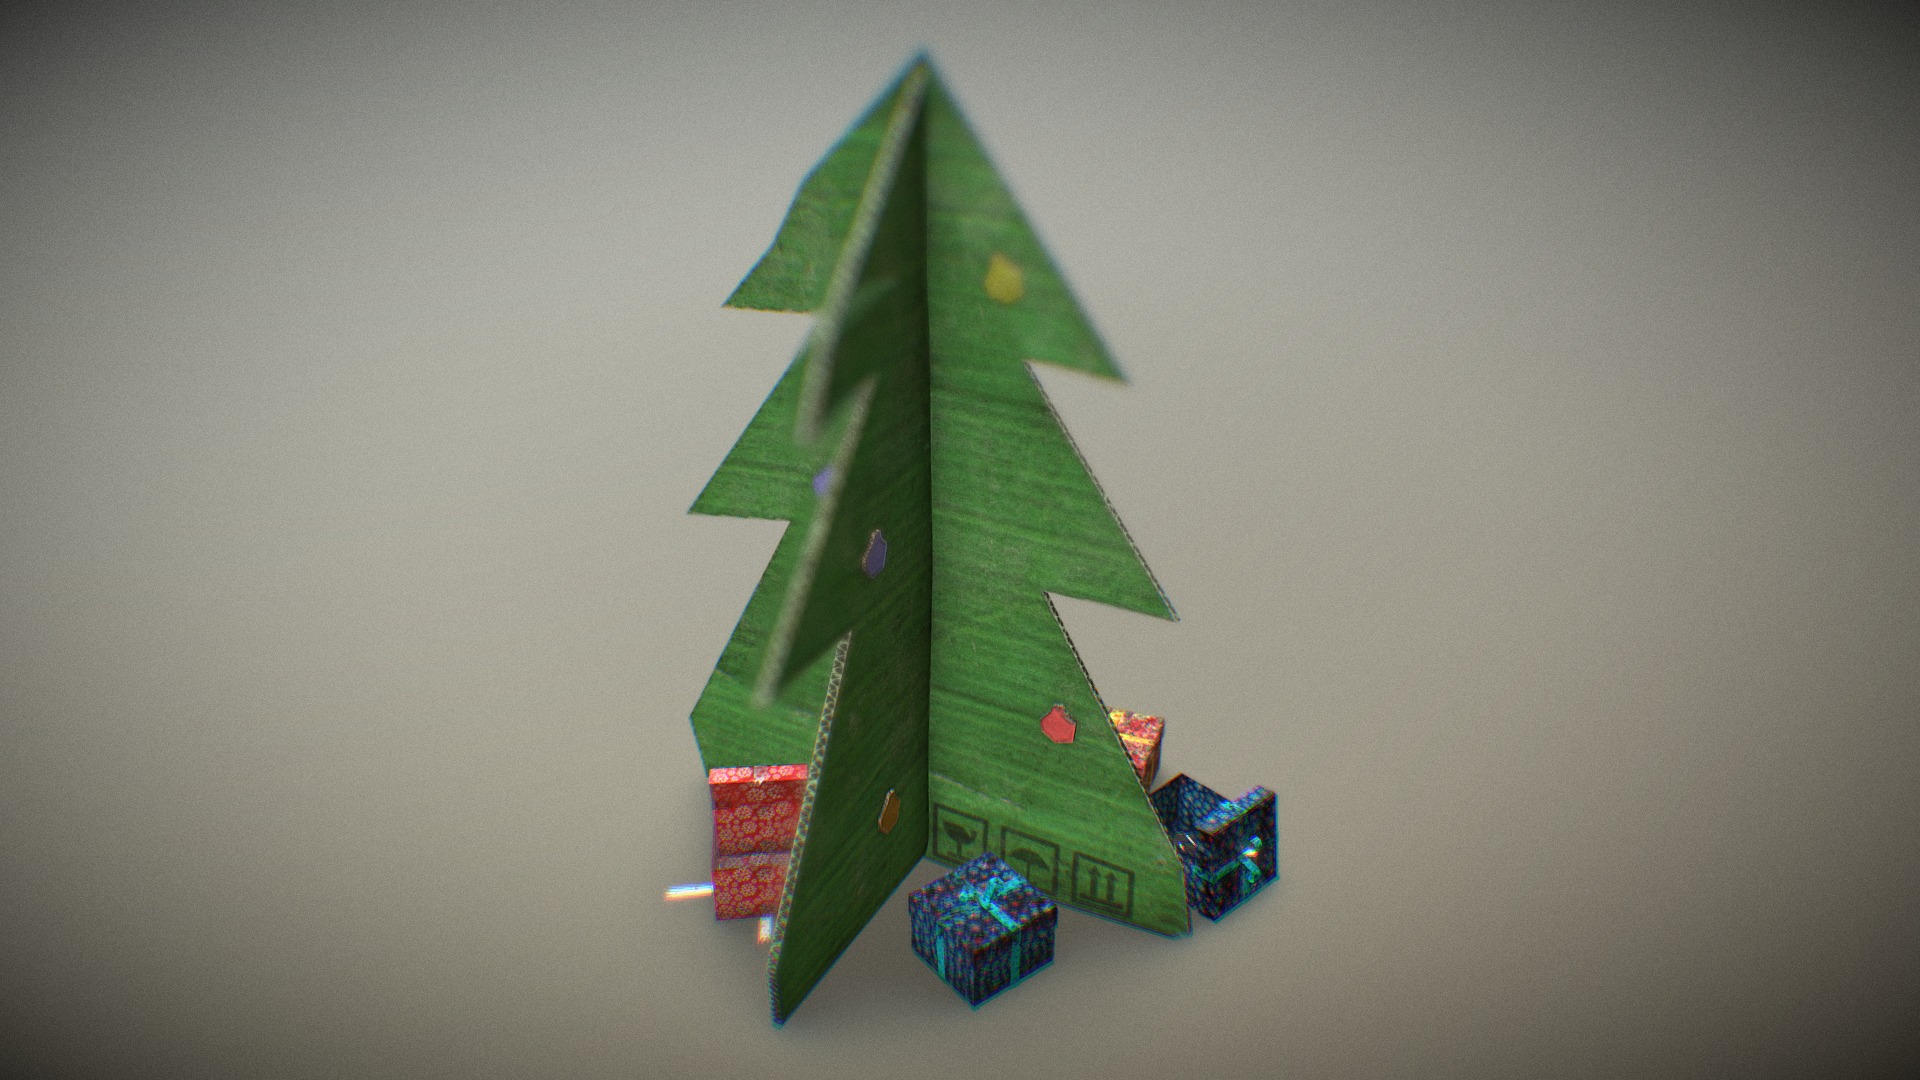 3D model Christmas tree and gifts - This is a 3D model of the Christmas tree and gifts. The 3D model is about a green paper airplane.